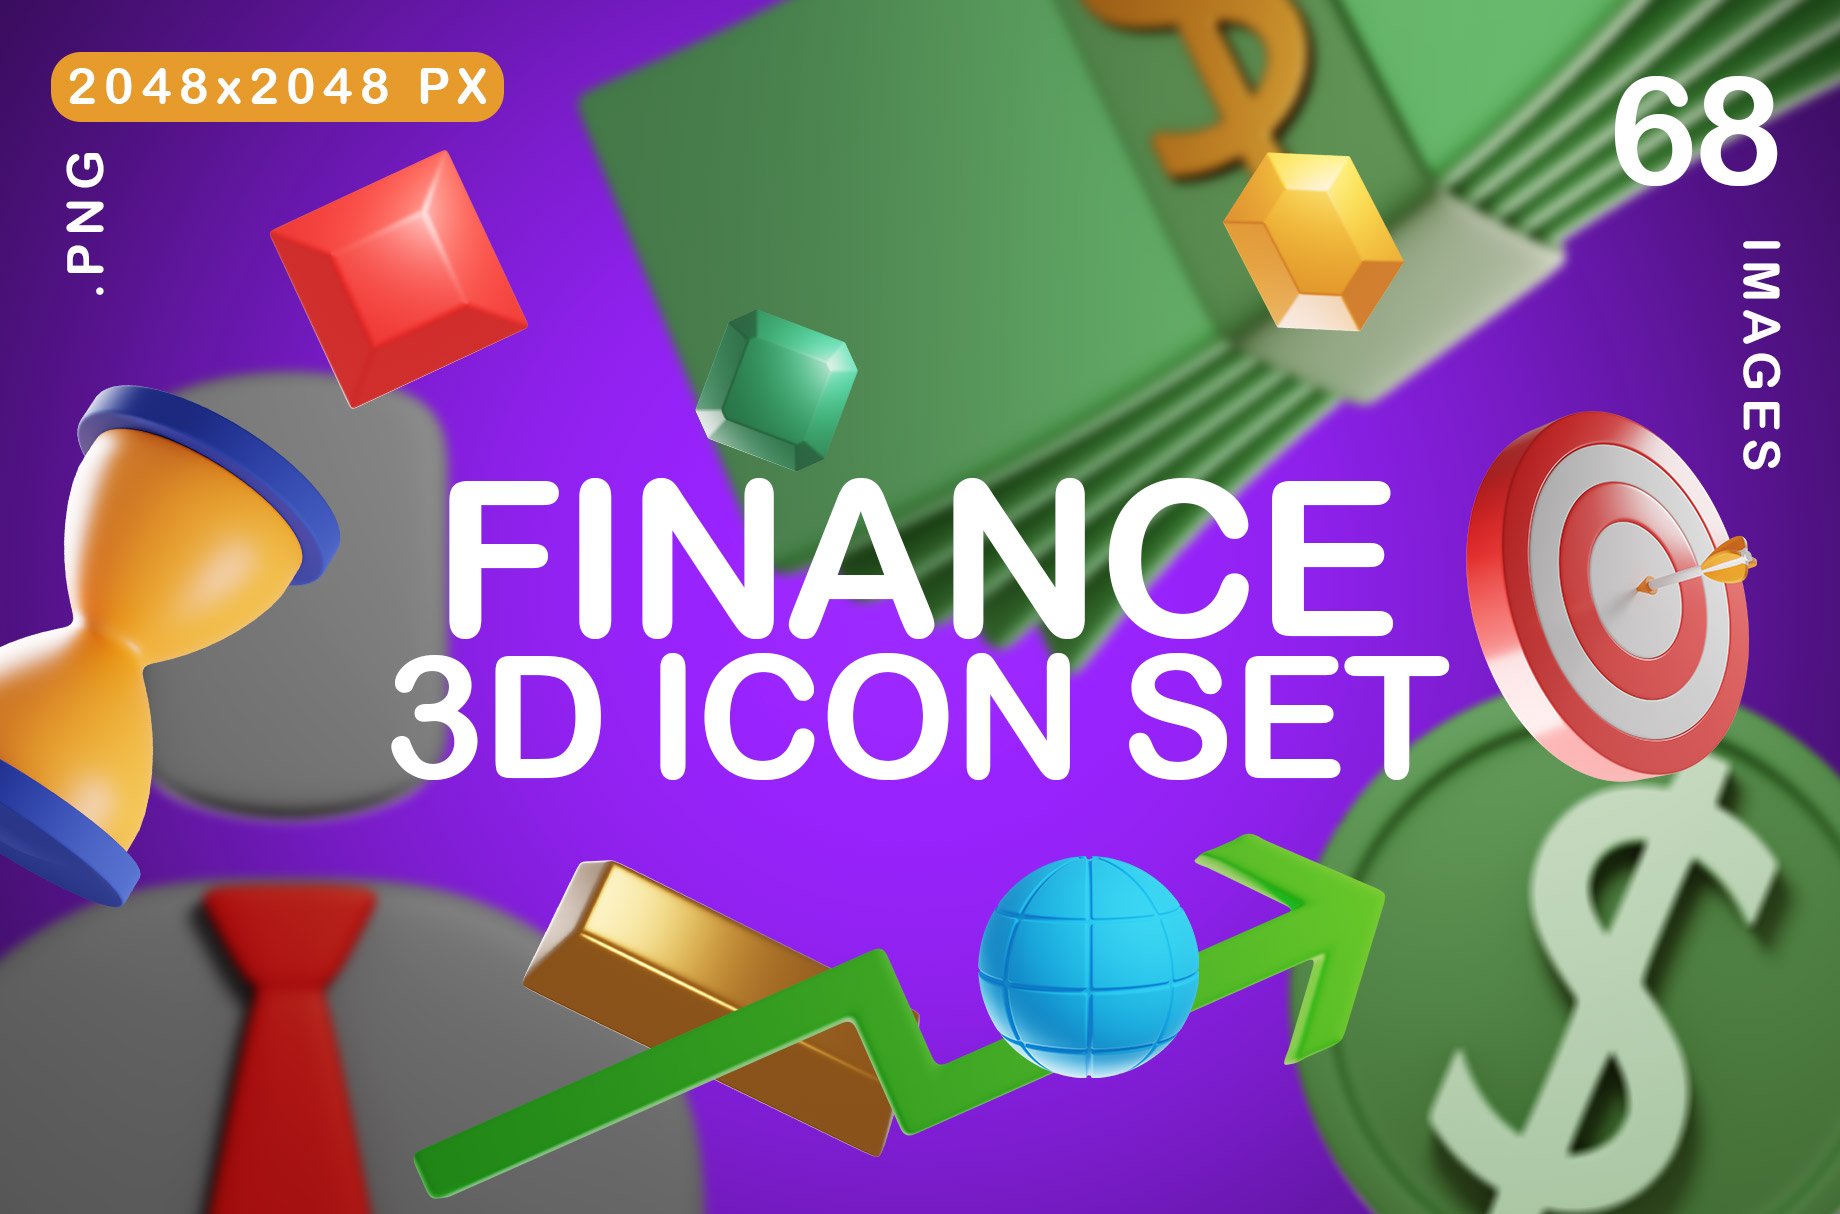 Finance 3D Icon Set cover image.